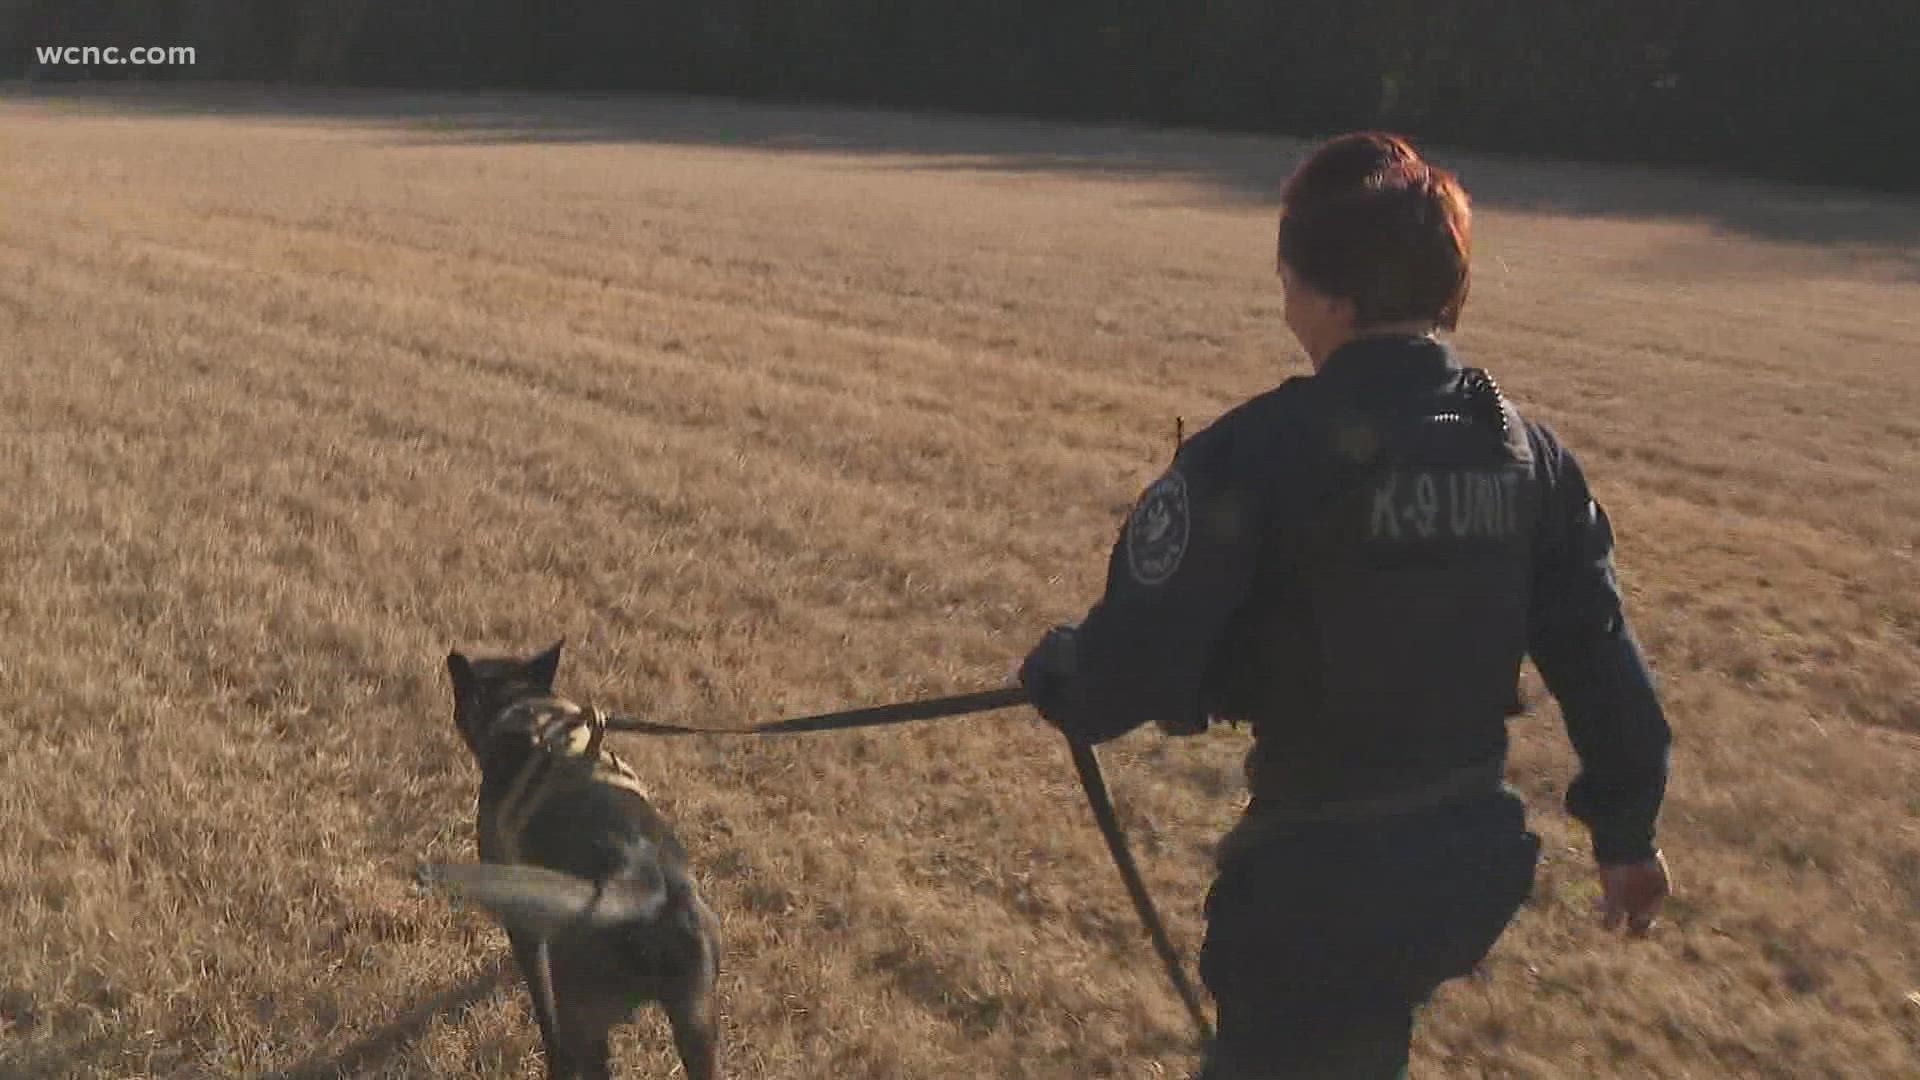 K9 Handler Nikki Warlick and K9 Koda are currently training to track the scent of a missing person or suspect.